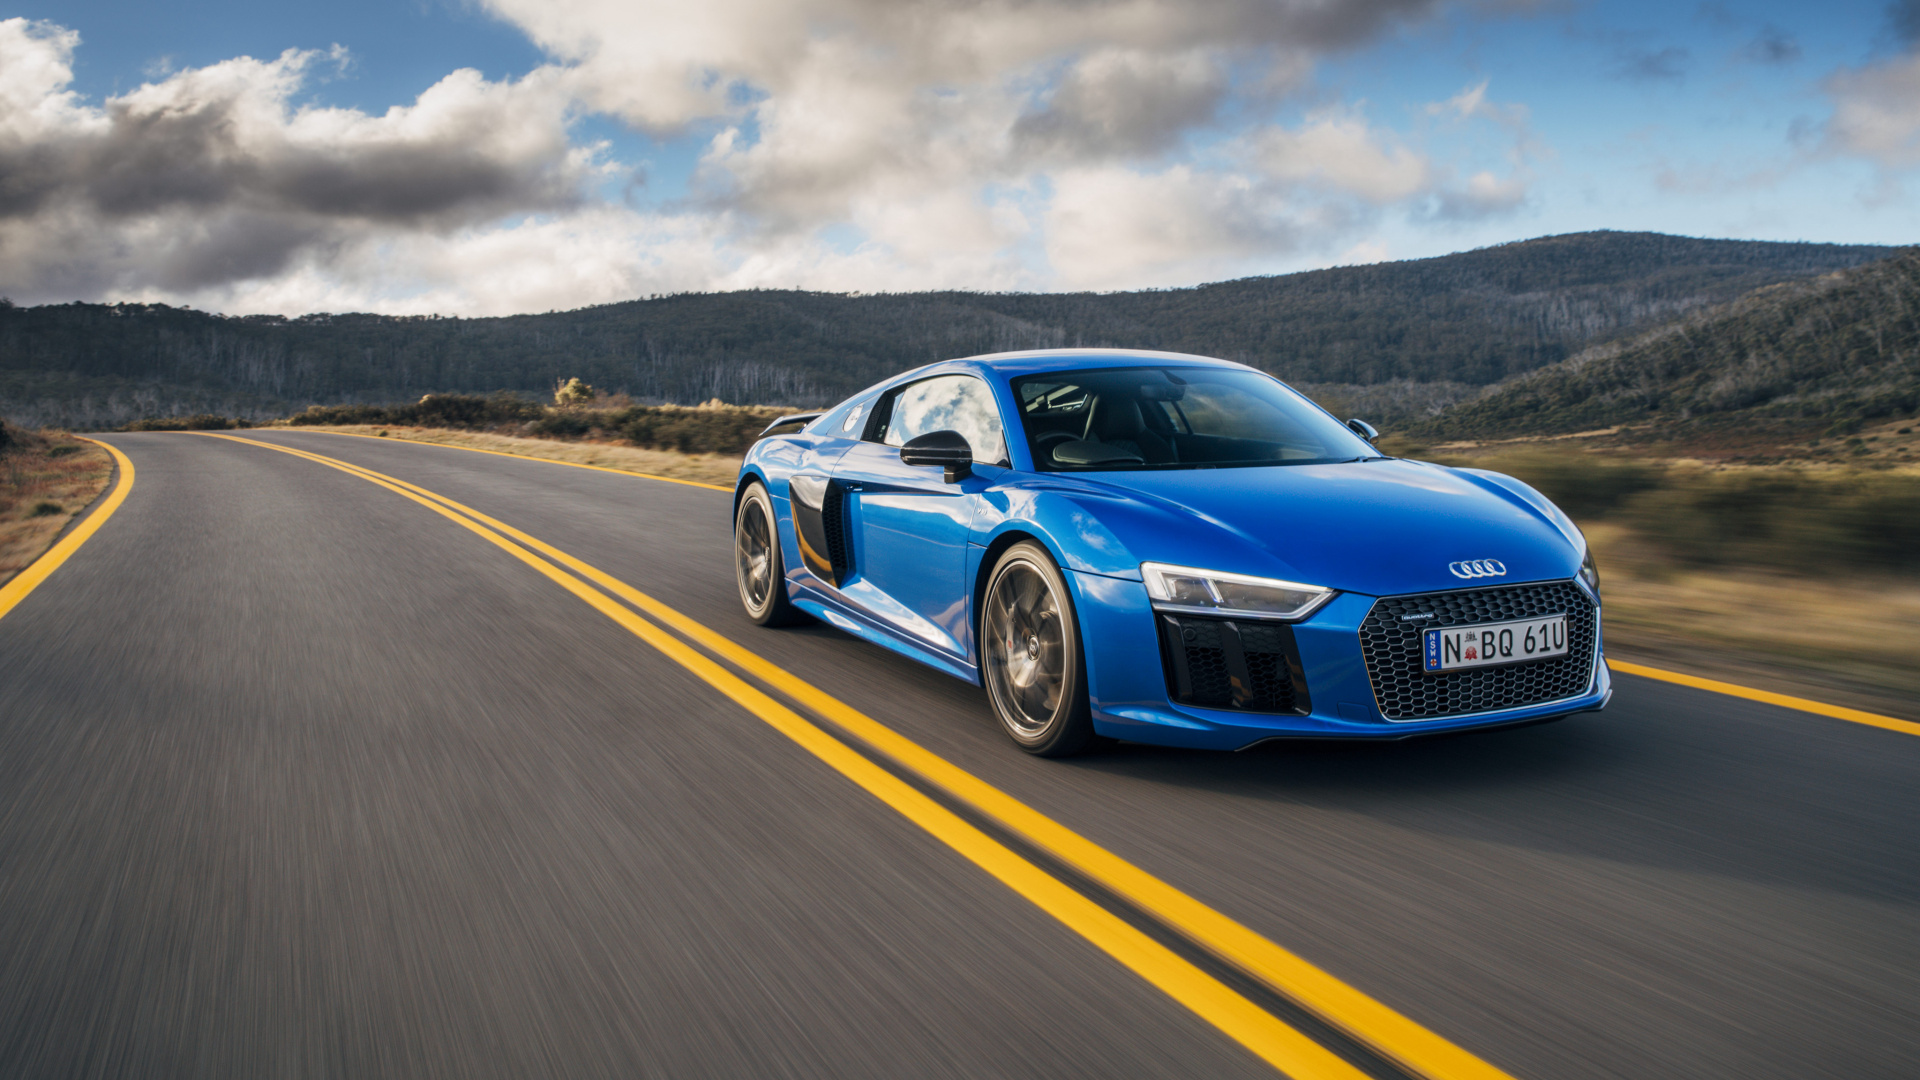 Blue Audi Coupe on Road During Daytime. Wallpaper in 1920x1080 Resolution